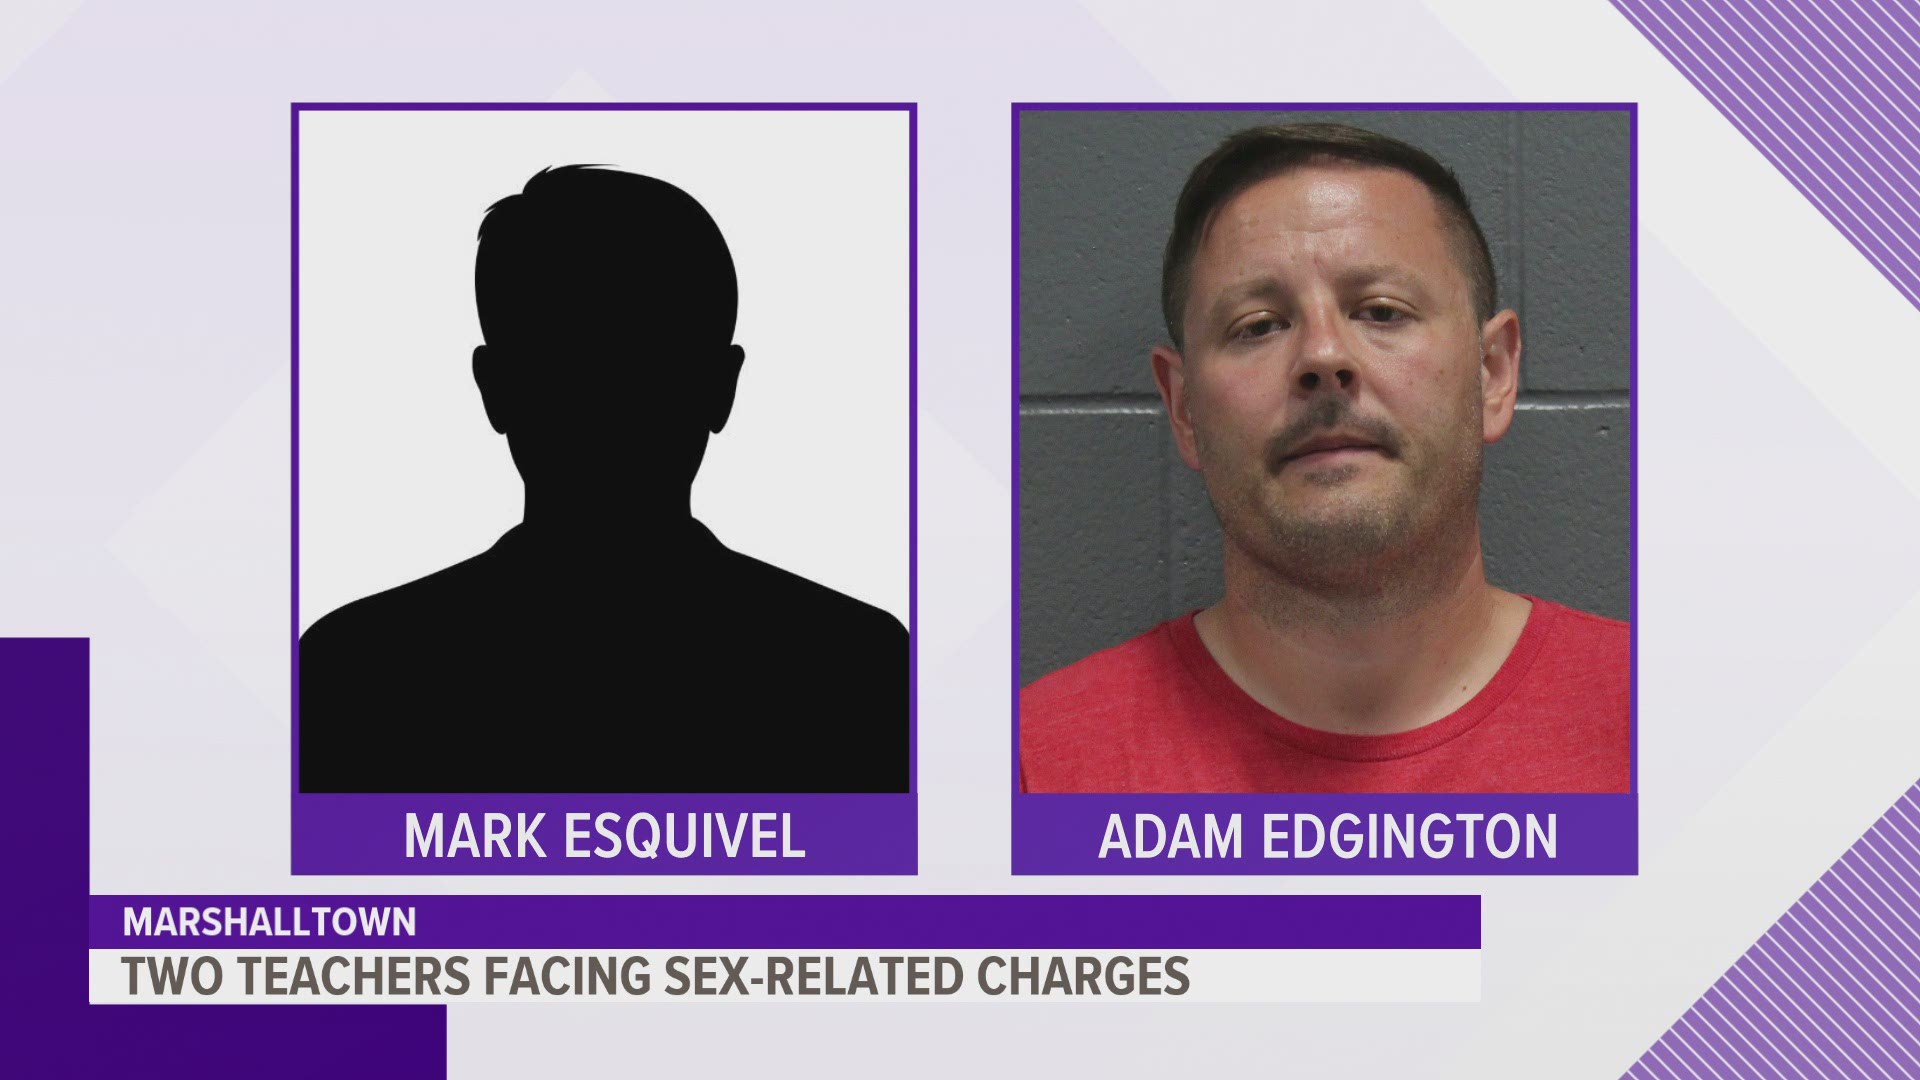 Two teachers in the district were arrested within a week of each other for inappropriate sexual contact with students, according to police.